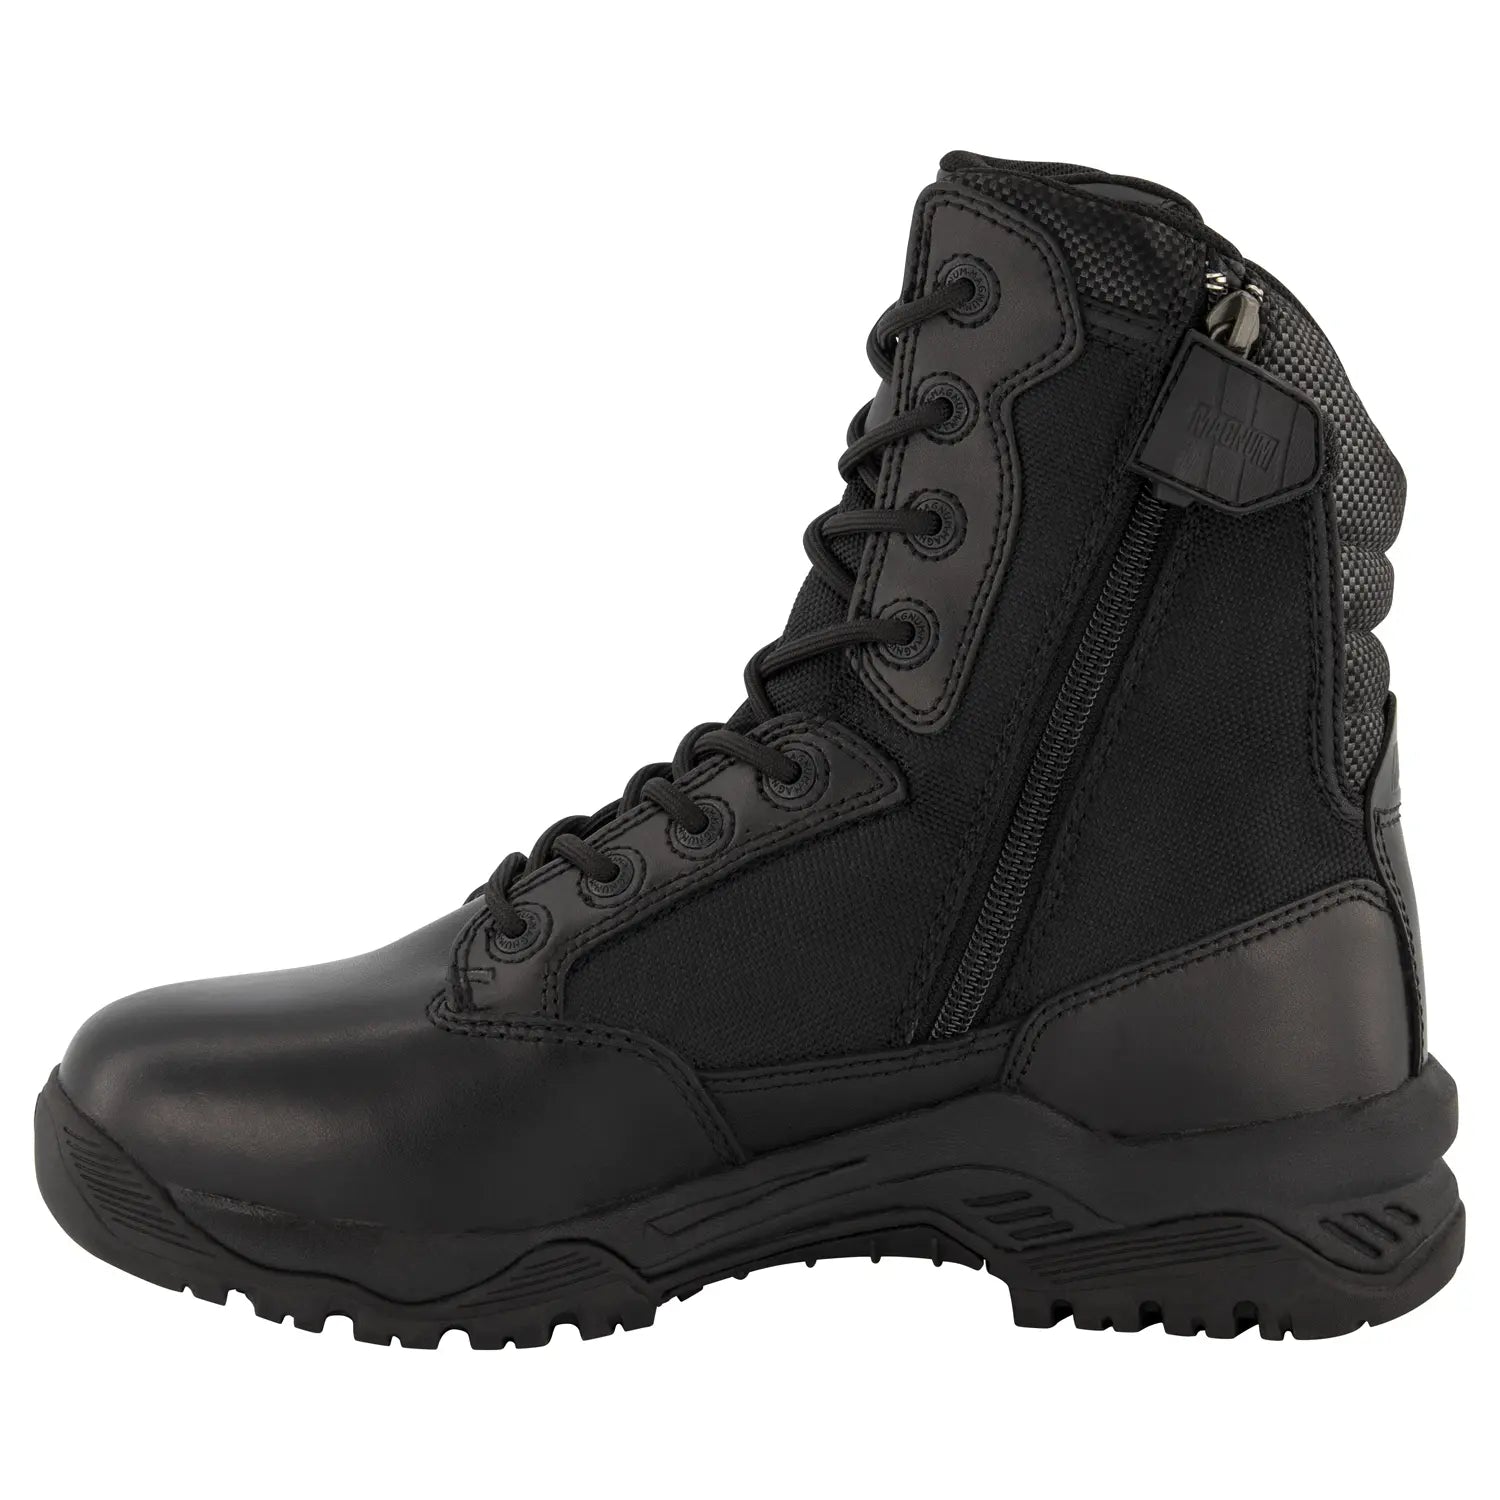 Magnum MSF900 Strike Force 8.0 SZ CT Safety Boots -Black